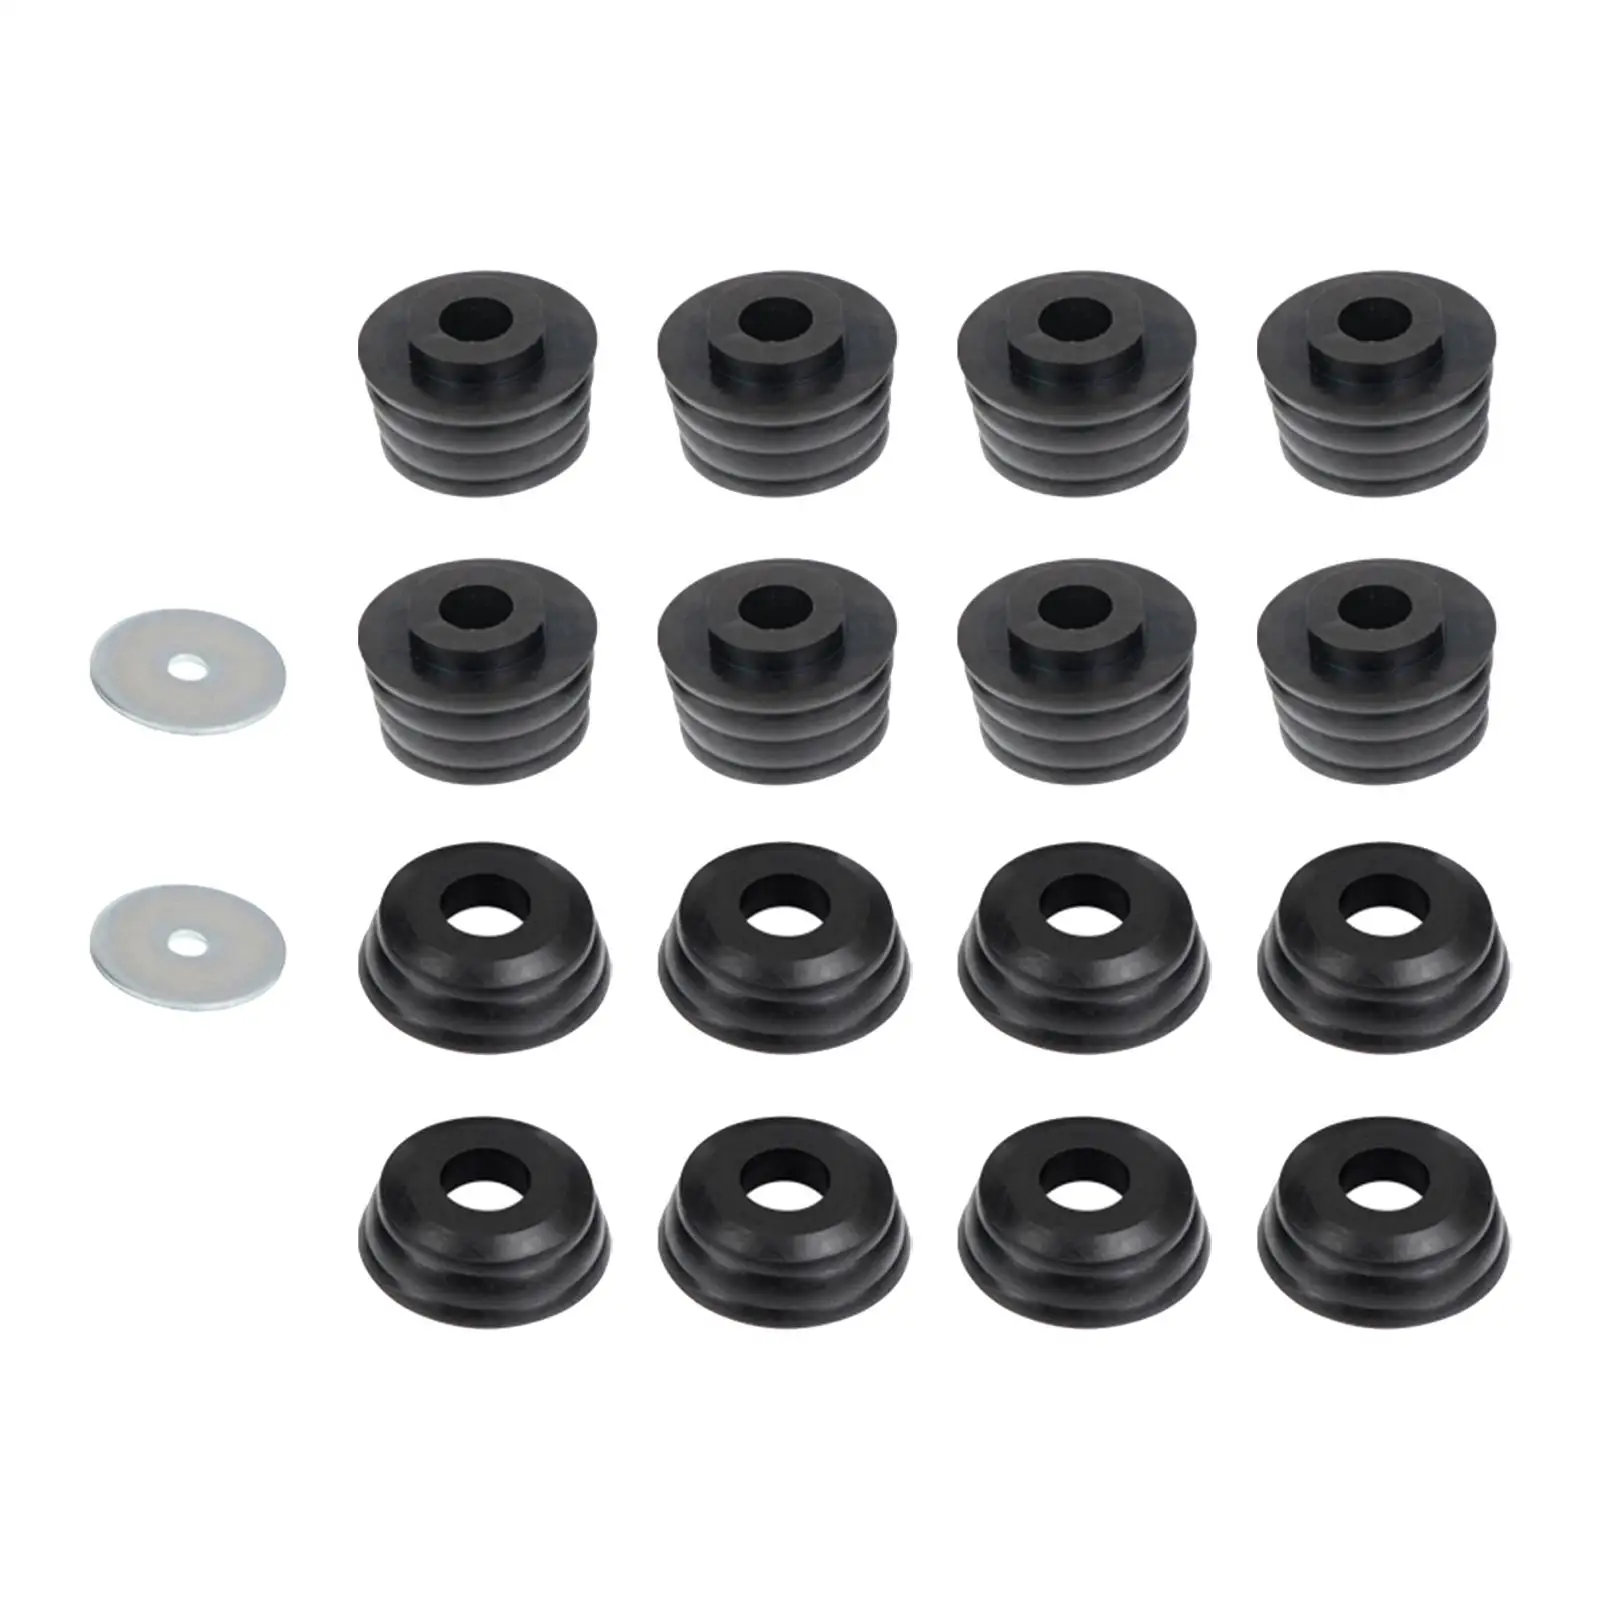 Body Cab Bushing Kit Replacement for Chevy Silverado 1999-2014 2WD 4WD